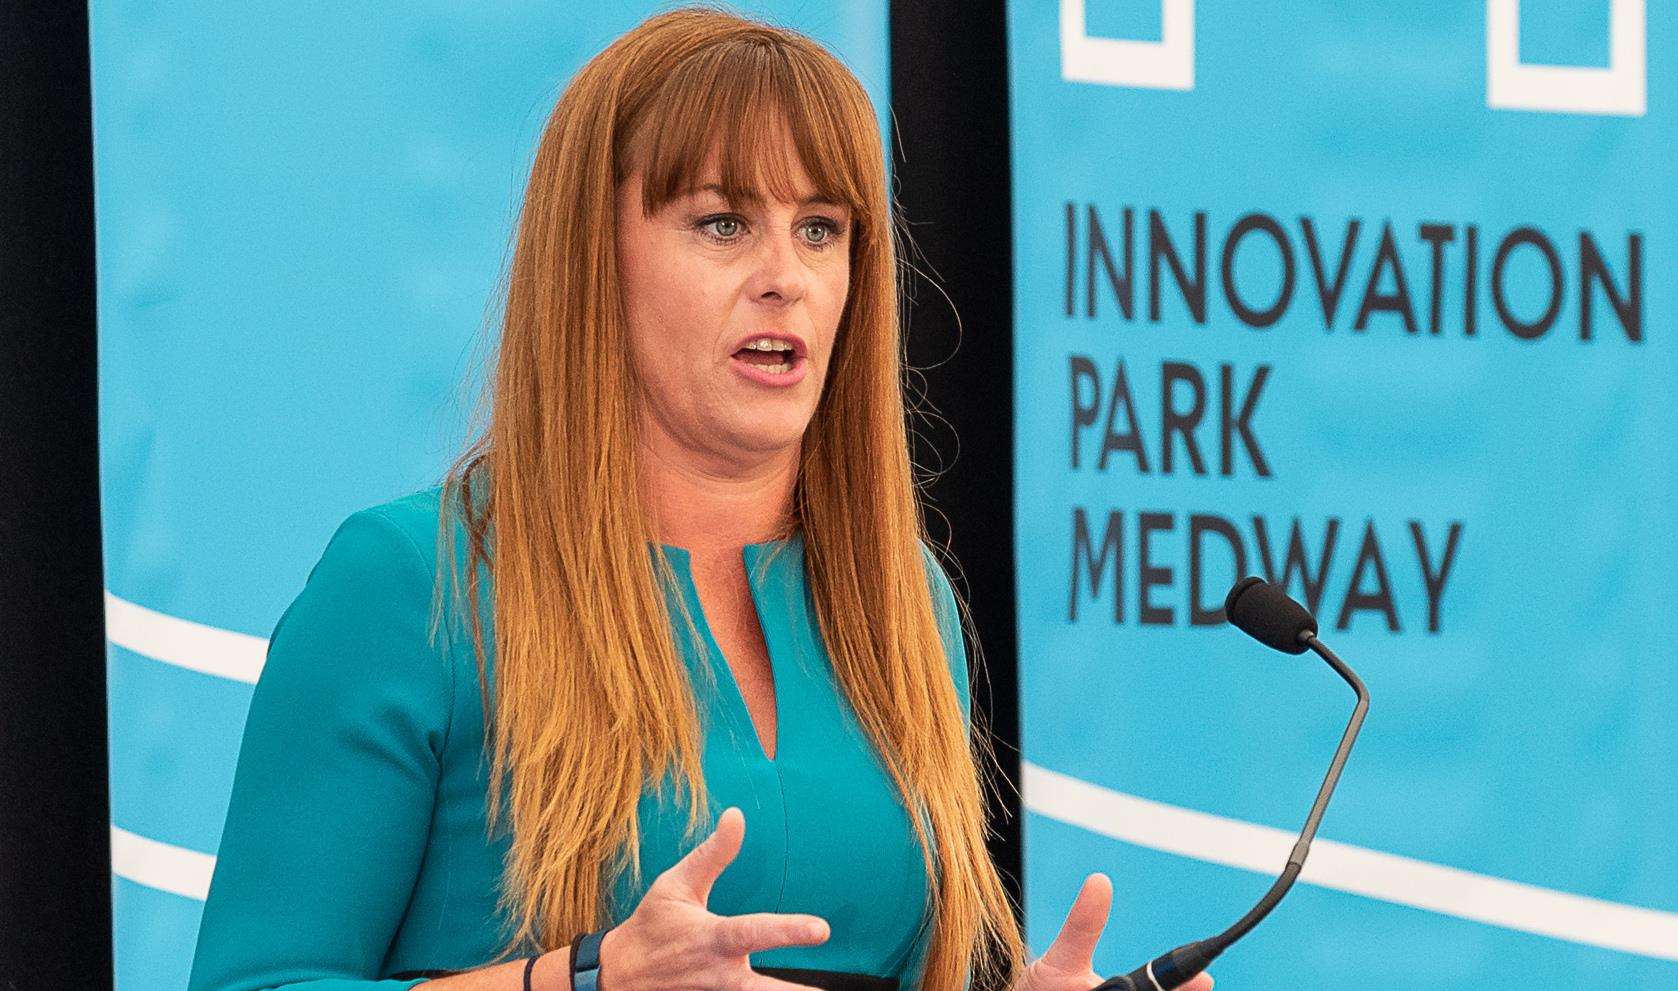 Small business minister Kelly Tolhurst - MP for Rochester and Strood